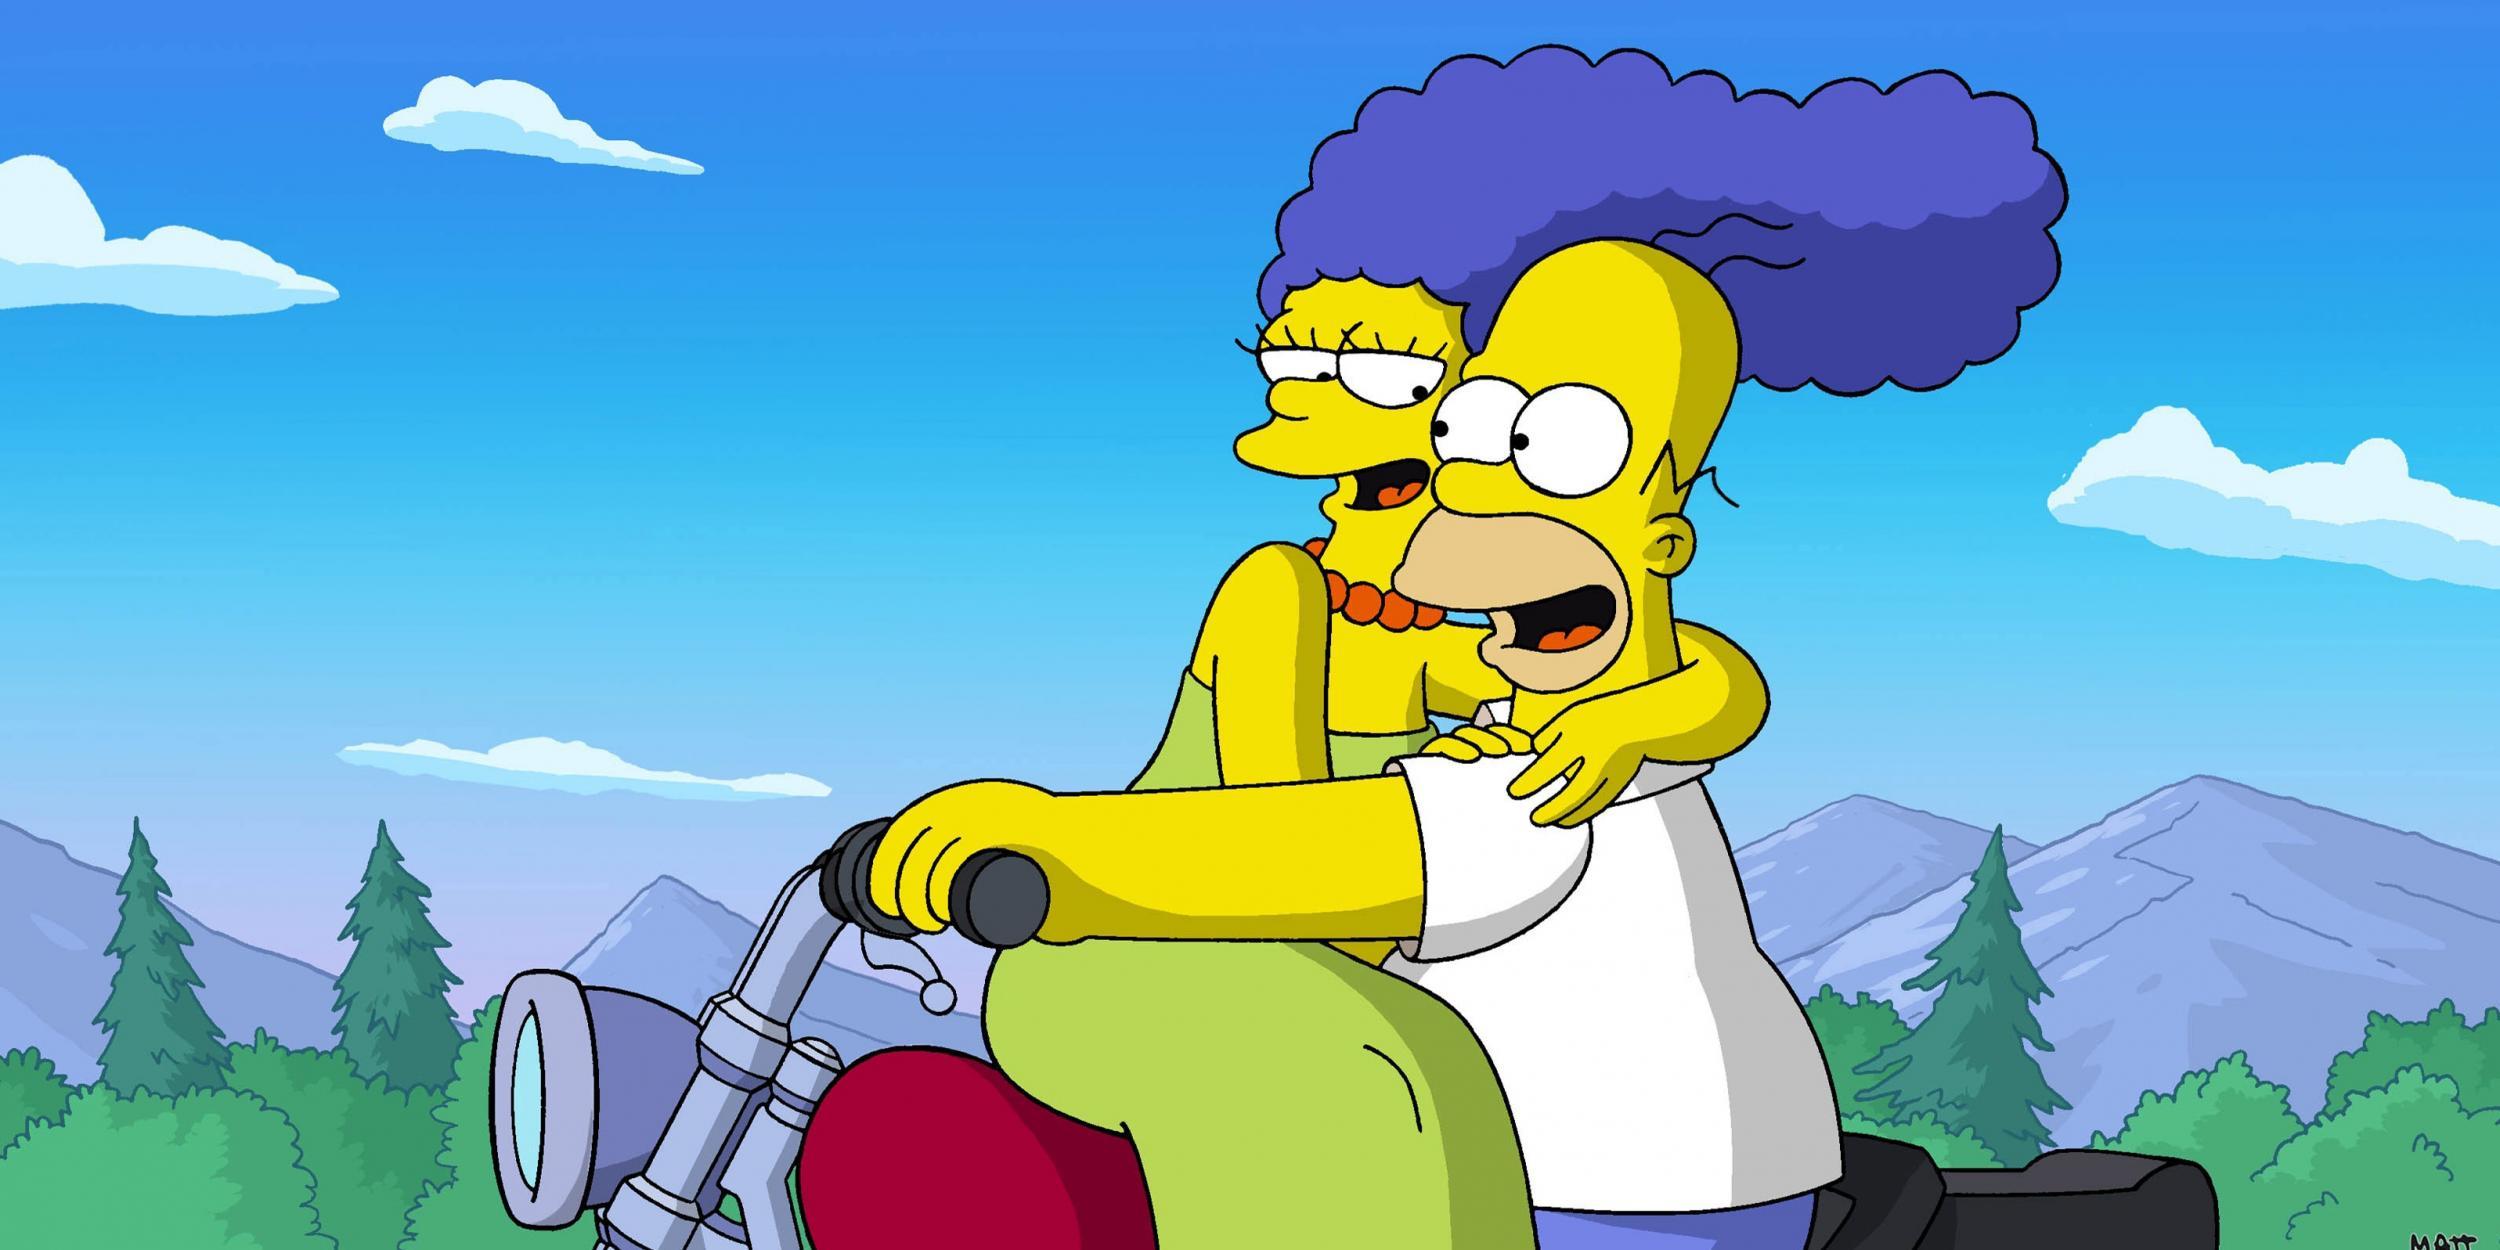 A marriage made in heaven? Reports suggest Disney and Fox thinking of tying the knot like Homer and Marge Simpson